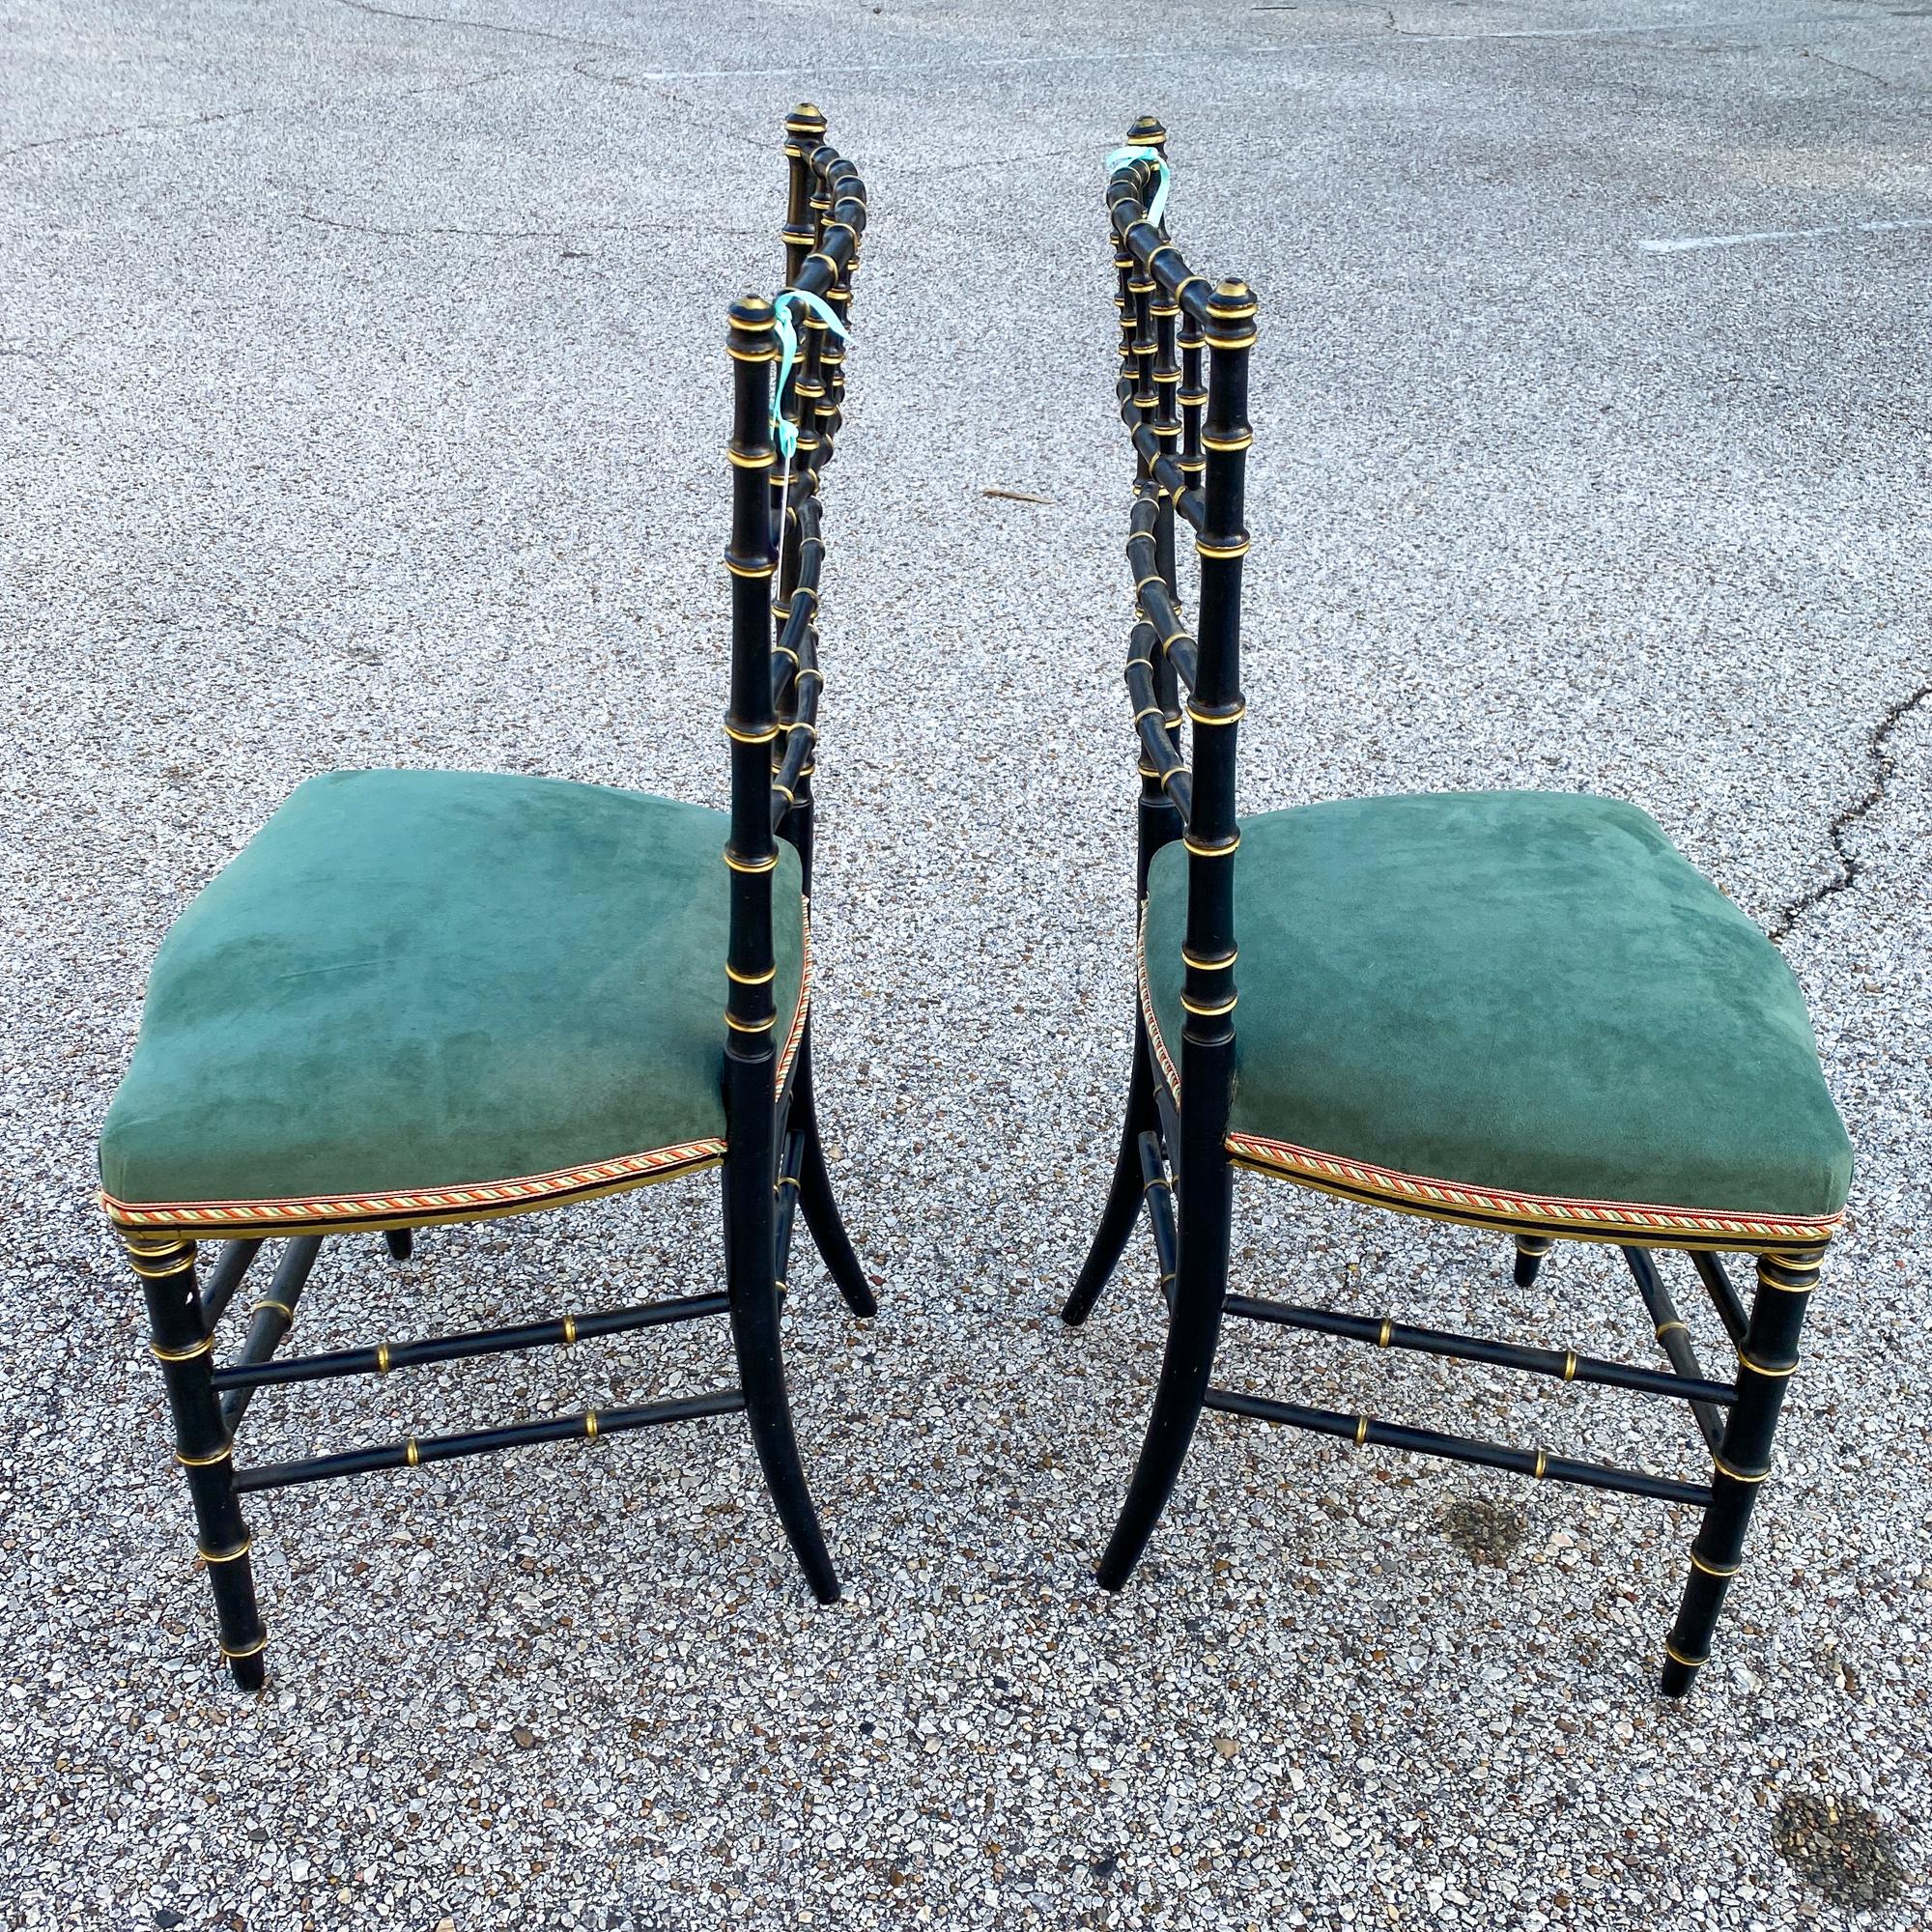 Each of these antique French Chinoiserie style chairs has a painted and waxed black finish with gilt accents and green suede upholstered seats. The rope trim around the seat edge is red, green and gold. The chairs have a faux bamboo look in their